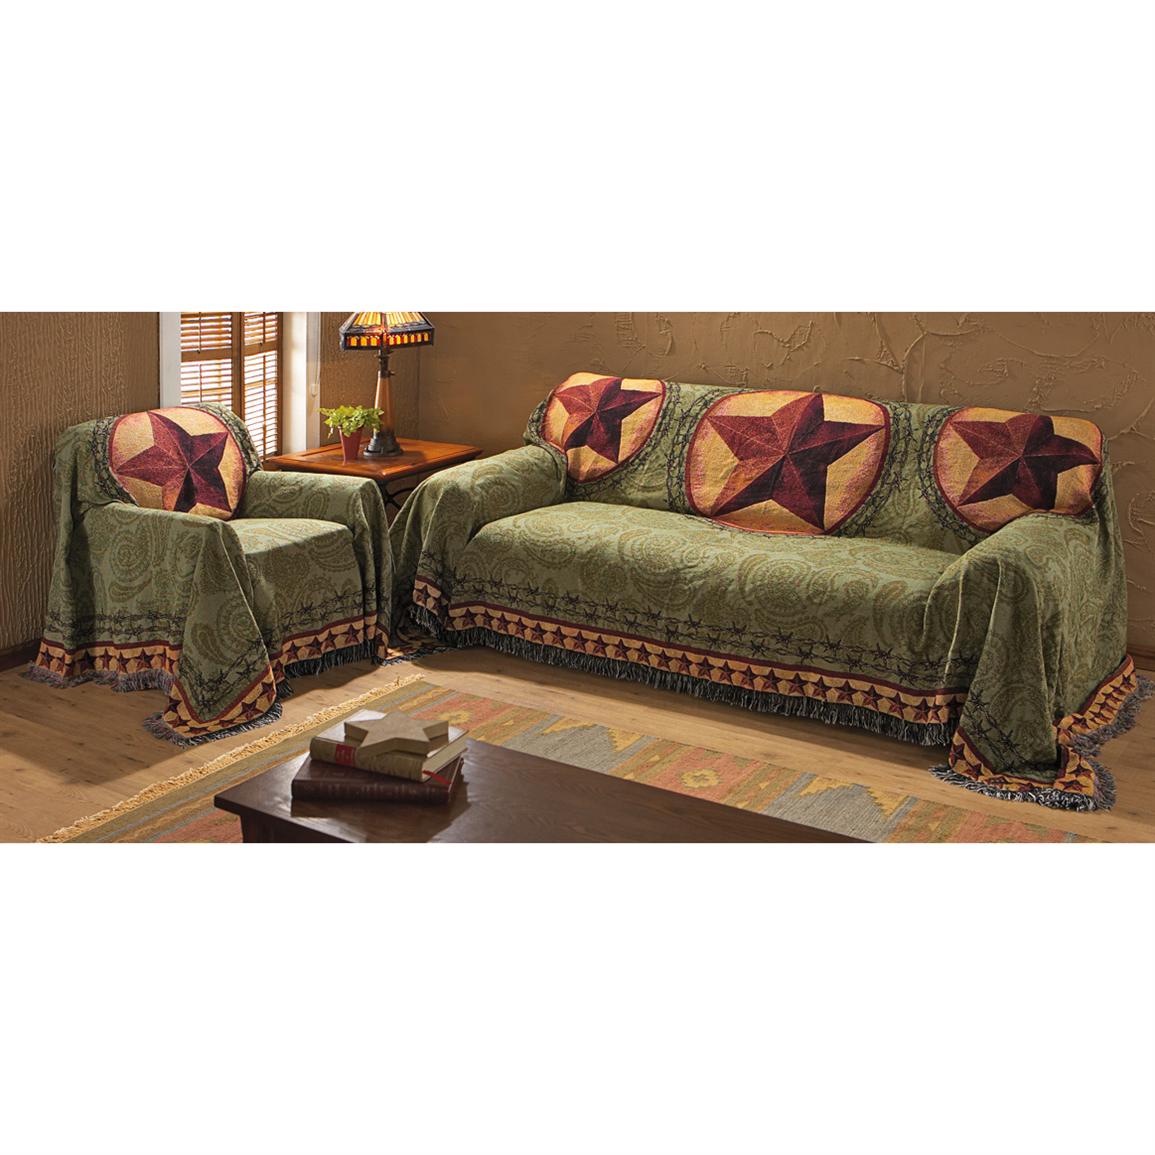 Western Star Furniture Throw 144973 Furniture Covers At